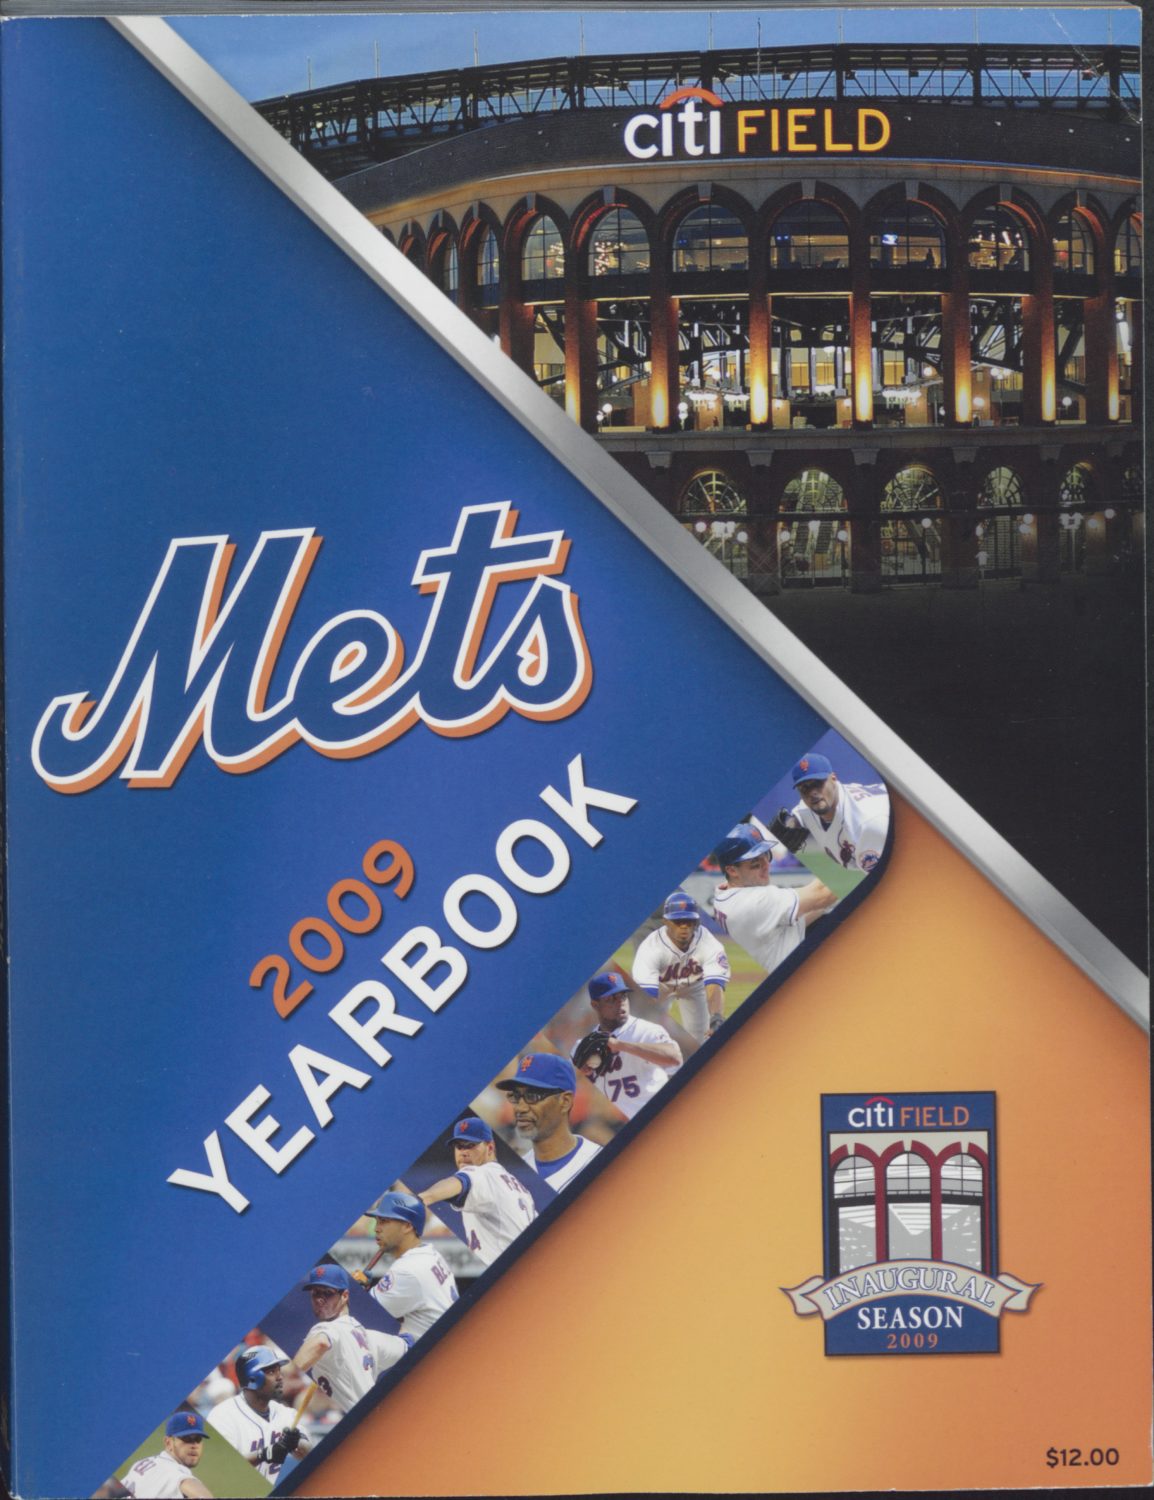 2009 New York Mets Yearbook: First Year at Citi Field